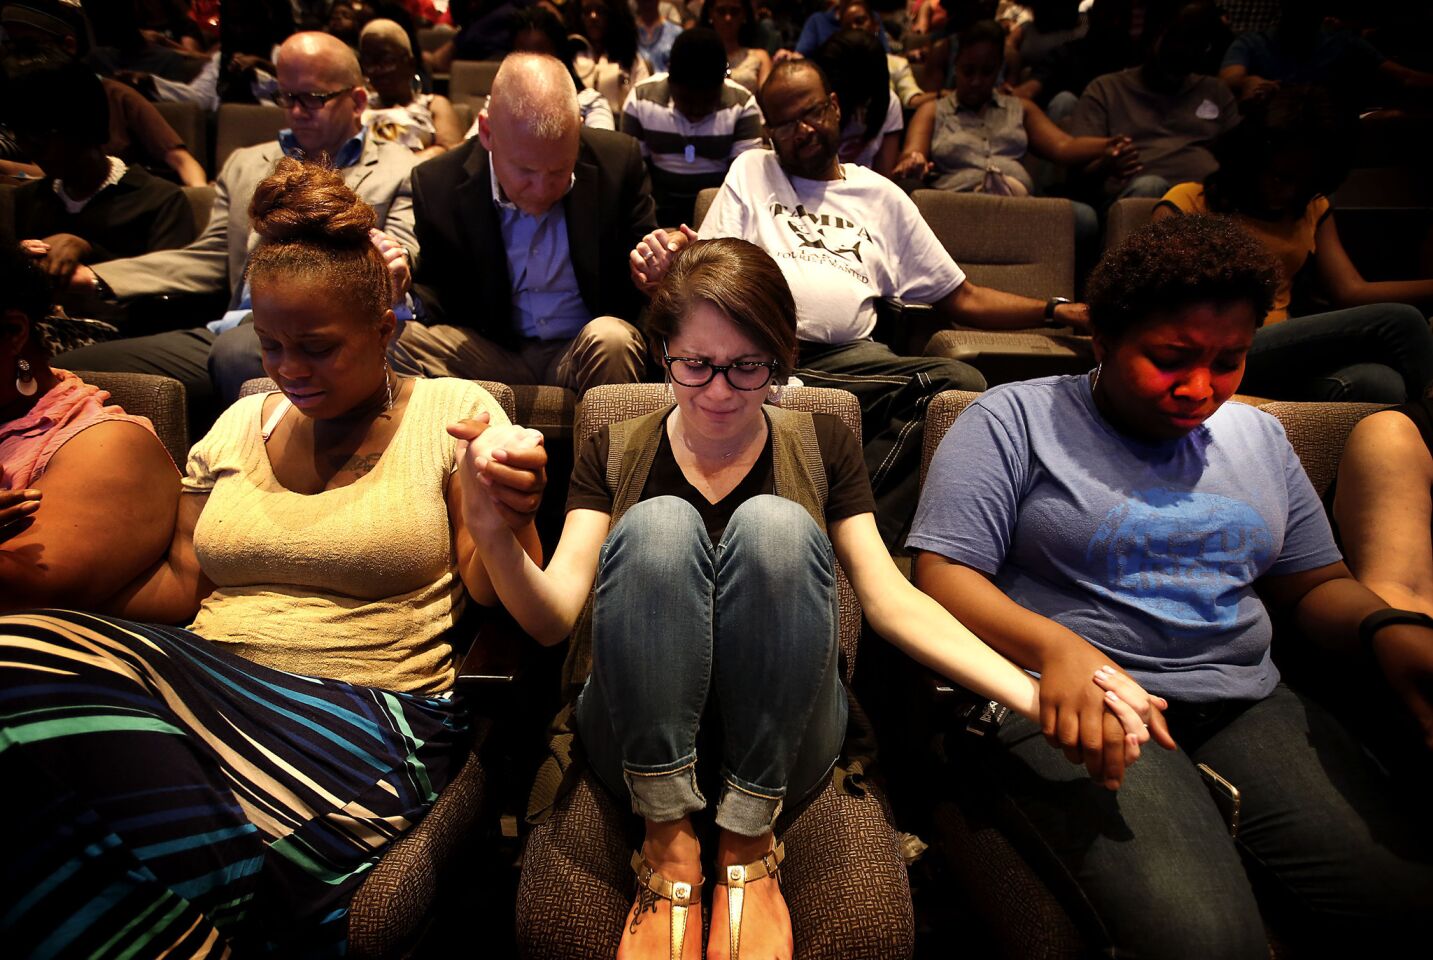 Stacy Powell, center, prays with others at the Concord Church in Dallas following the police shooting.